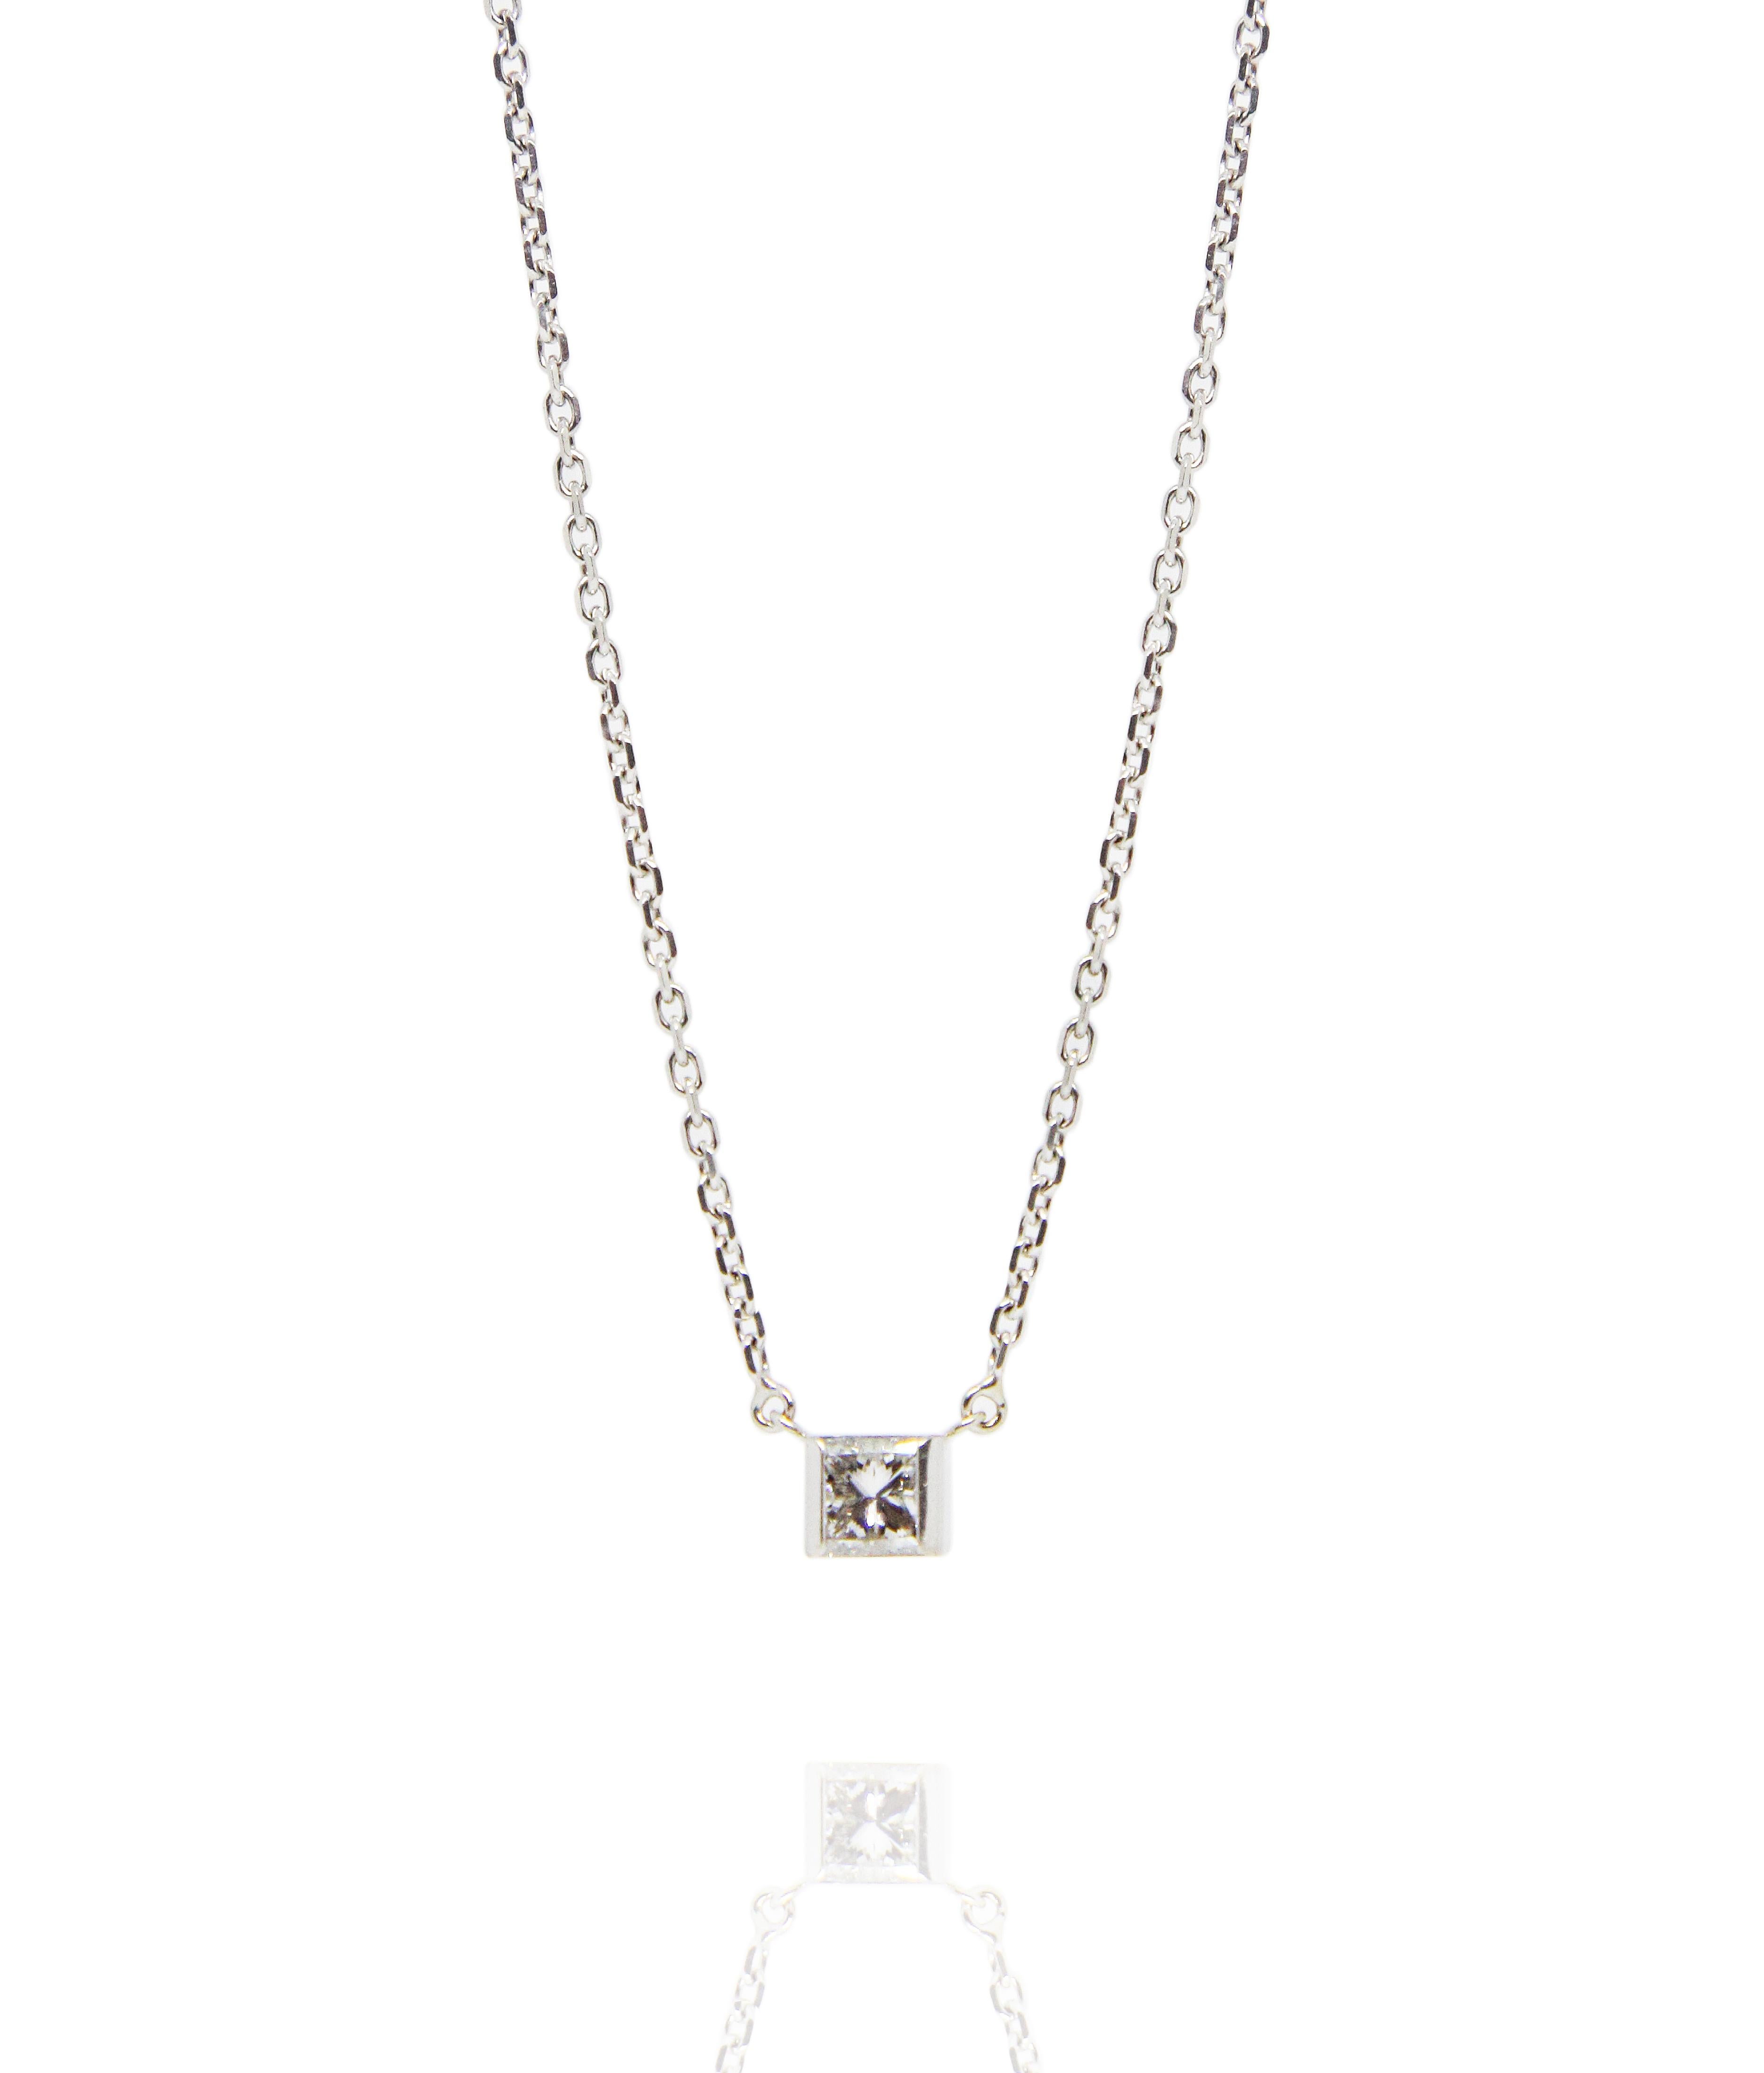 Rare Cartier White Gold Diamond Necklace
18K white gold Cartier chain necklace with fixed pendant 
1 solitaire diamond 0.7ct in princess cut
Cartier CC logo on back
„Cartier“ engraved on side
Double spring ring security closures
Total weight 4.5g